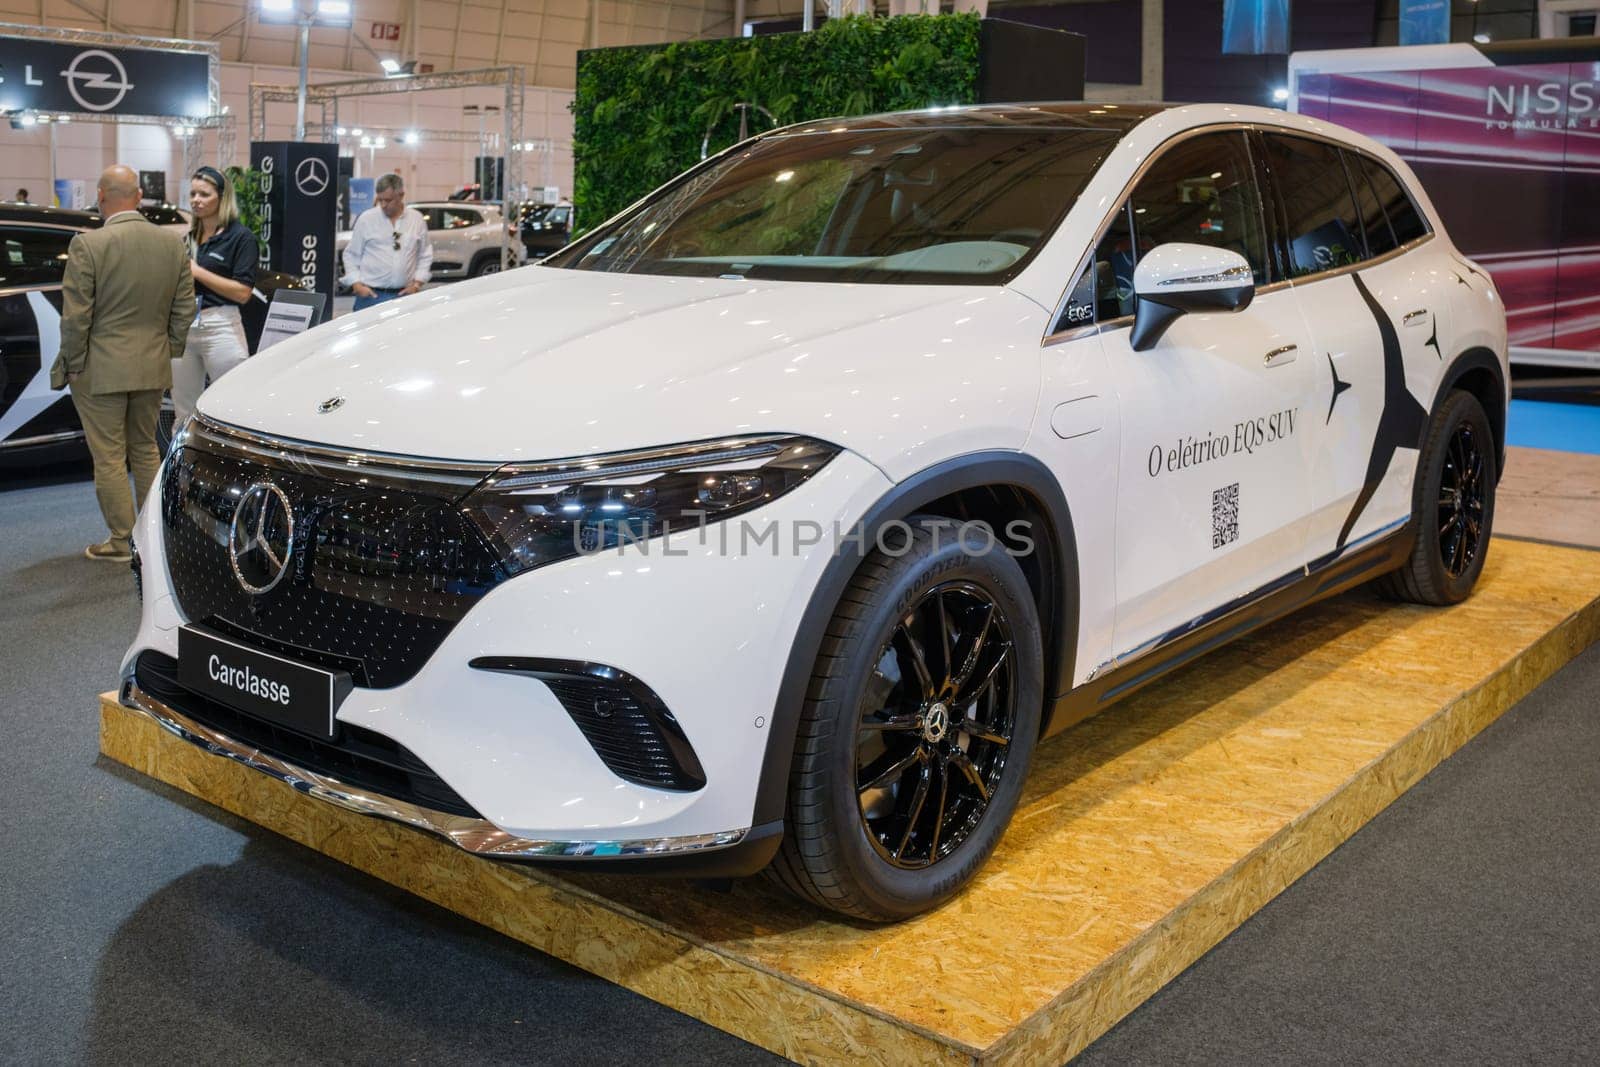 Mercedes-Benz EQS 580 4Matic SUV electric car at ECAR SHOW - Hybrid and Electric Motor Show by dimol